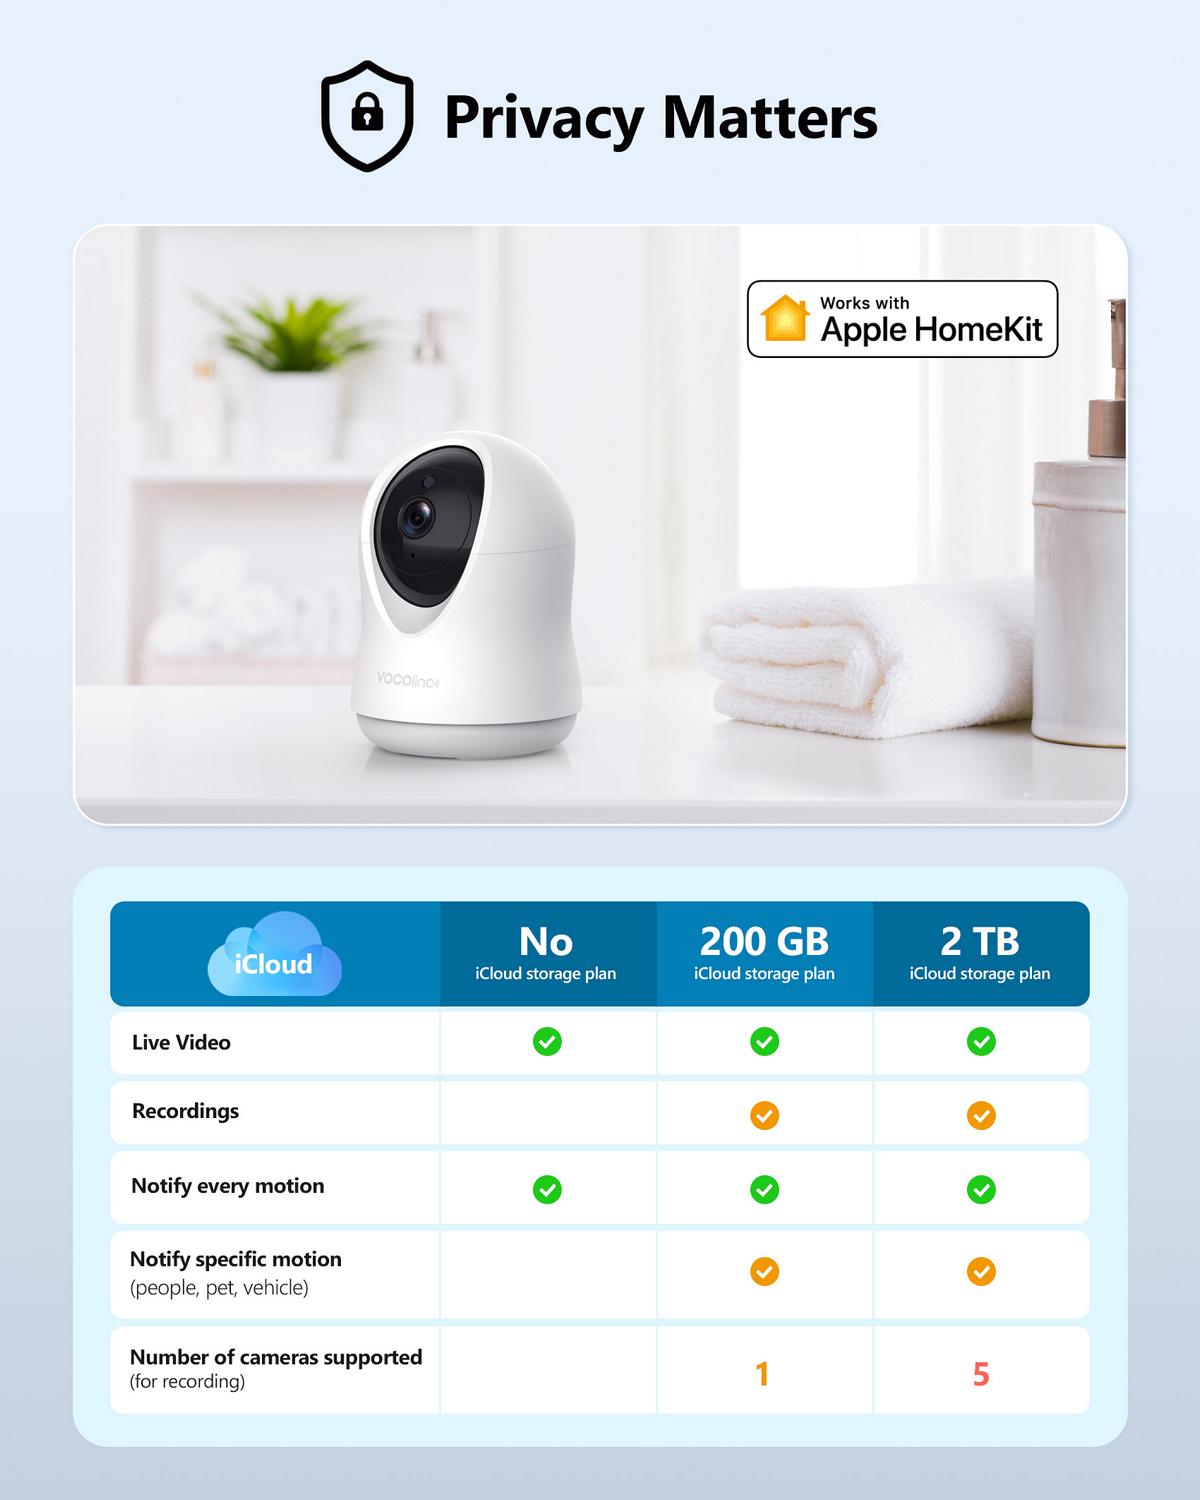 Our indoor camera is designed for Apple HomeKit Secure Video, enabling you to securely view your live video stream or store end-to-end encrypted video. No one could access your information without your permission.